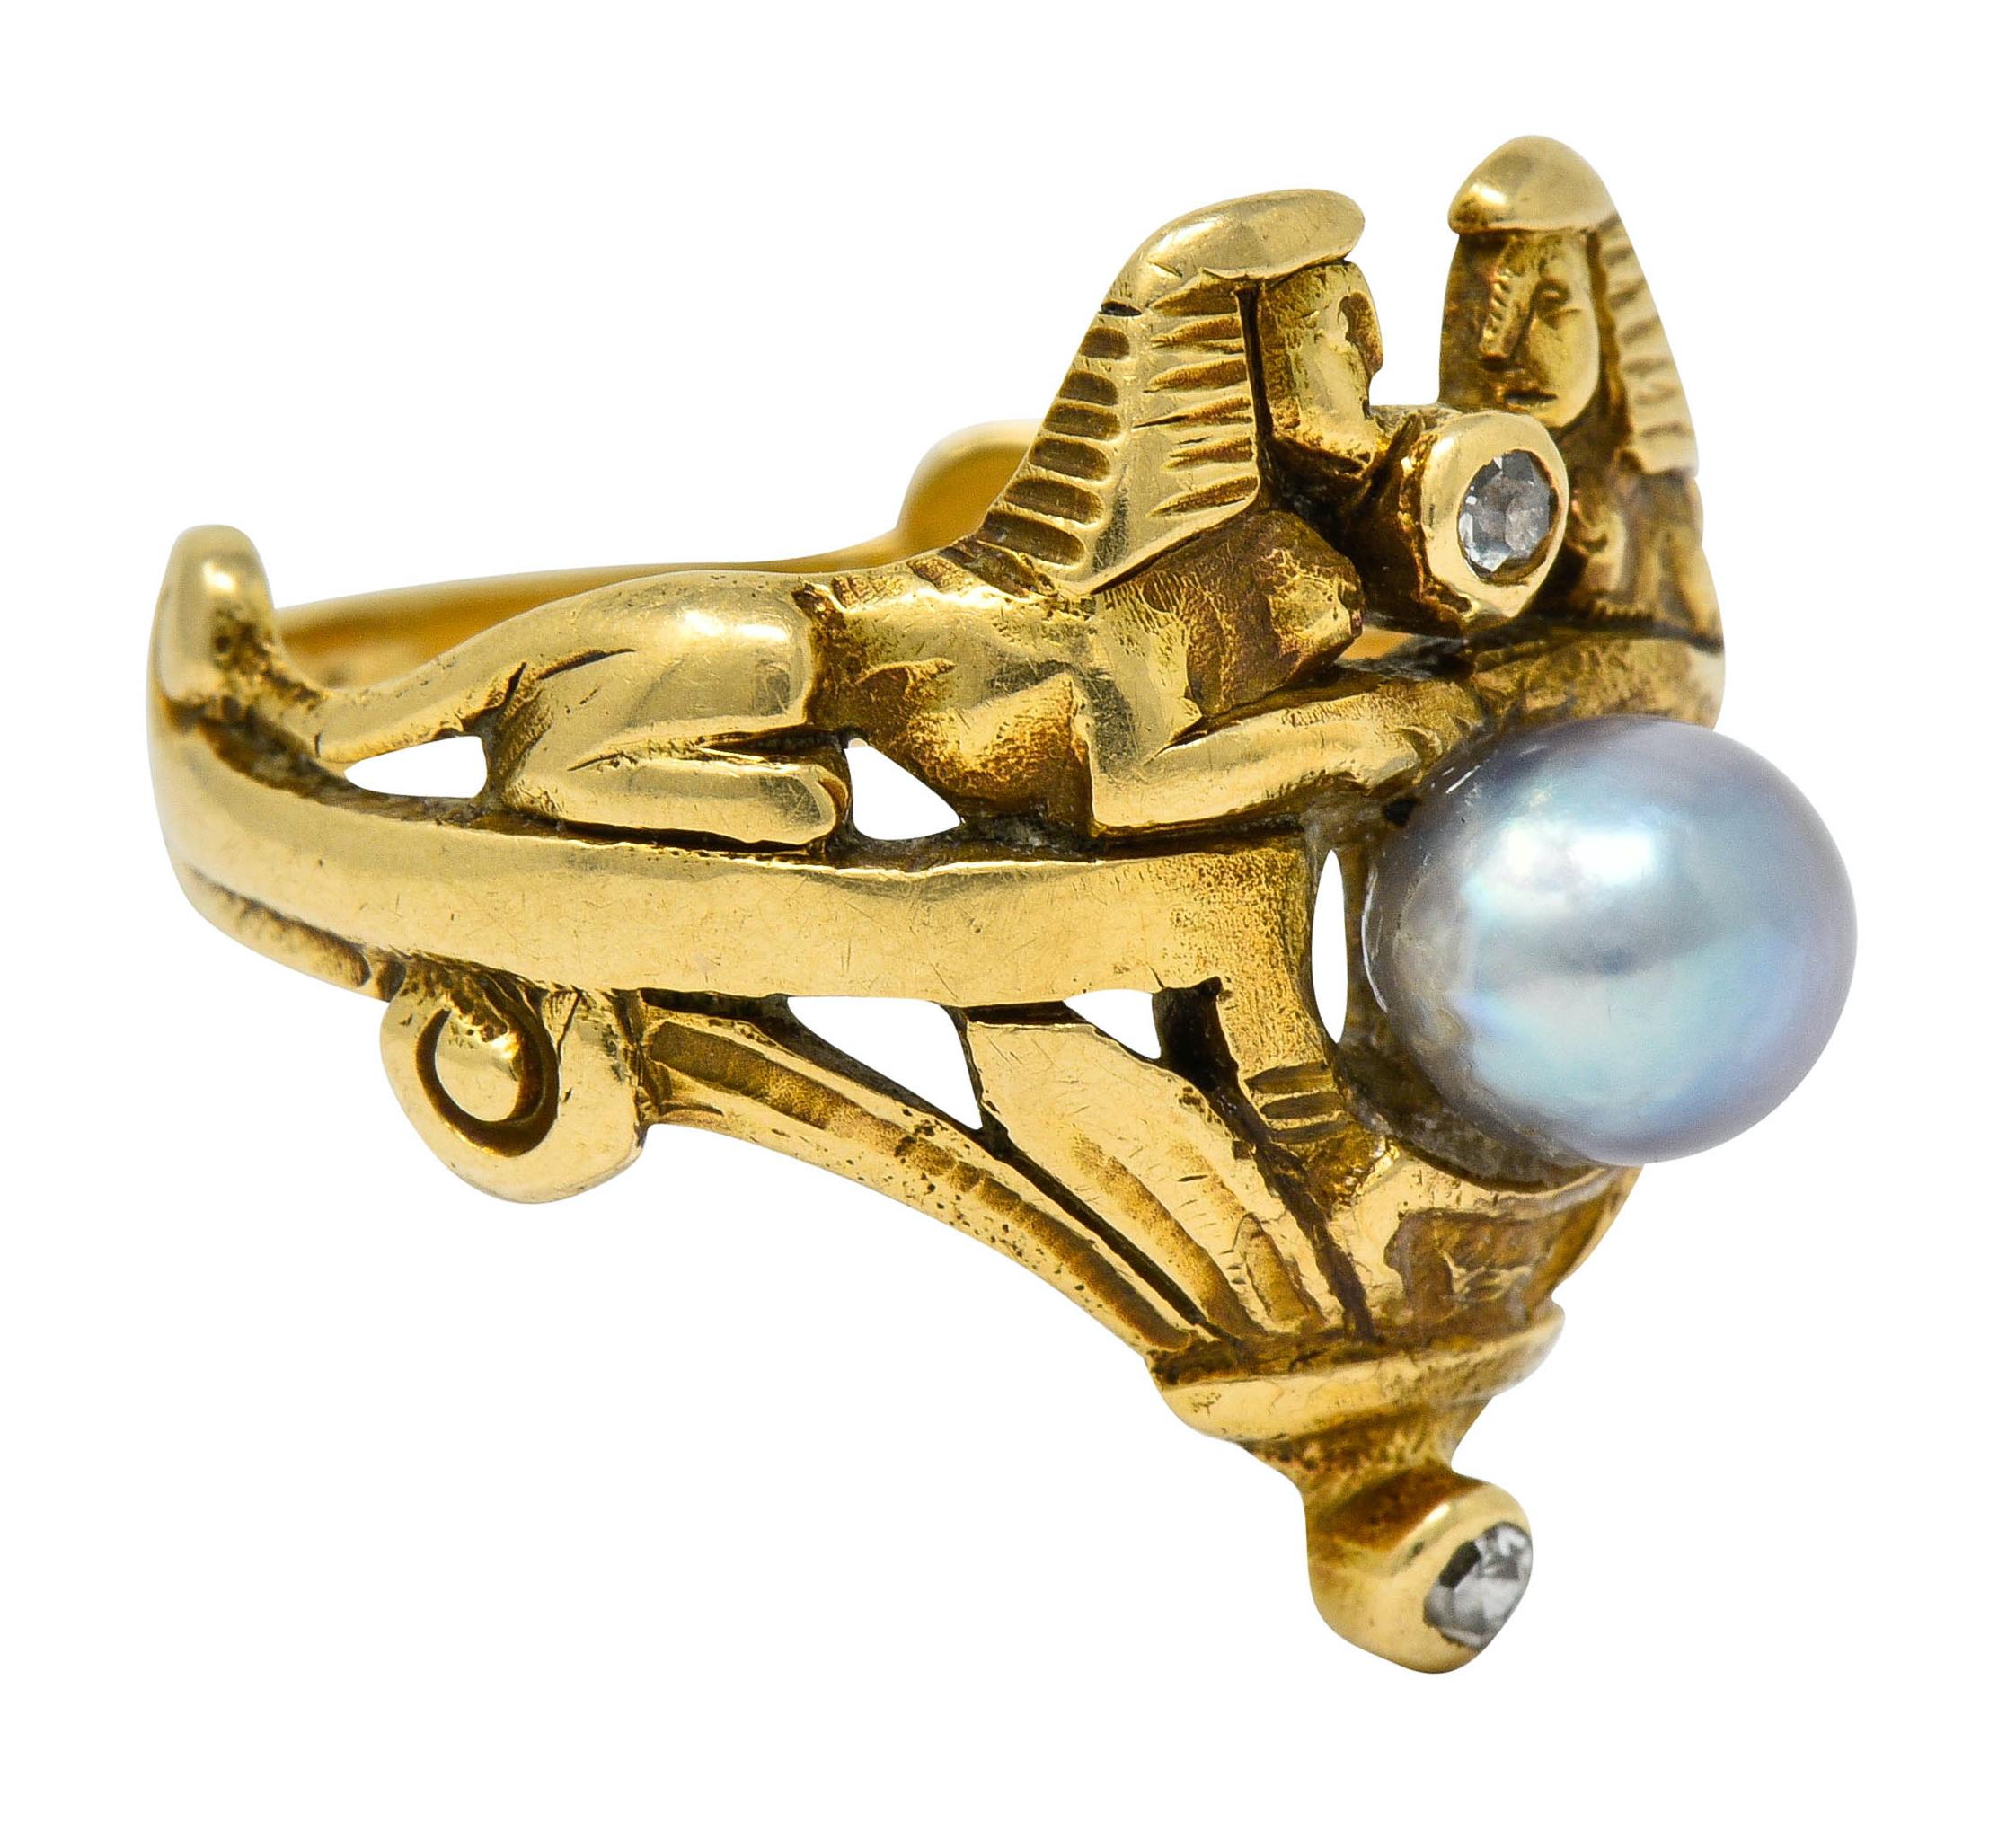 Band style ring is designed as two mirrored Sphinx with a stylized lotus base

Centering a semi-round 5.6 mm pearl, gray in body color with slight green/purple overtones and good luster

With engraved and scrolled whiplash details accented by bezel